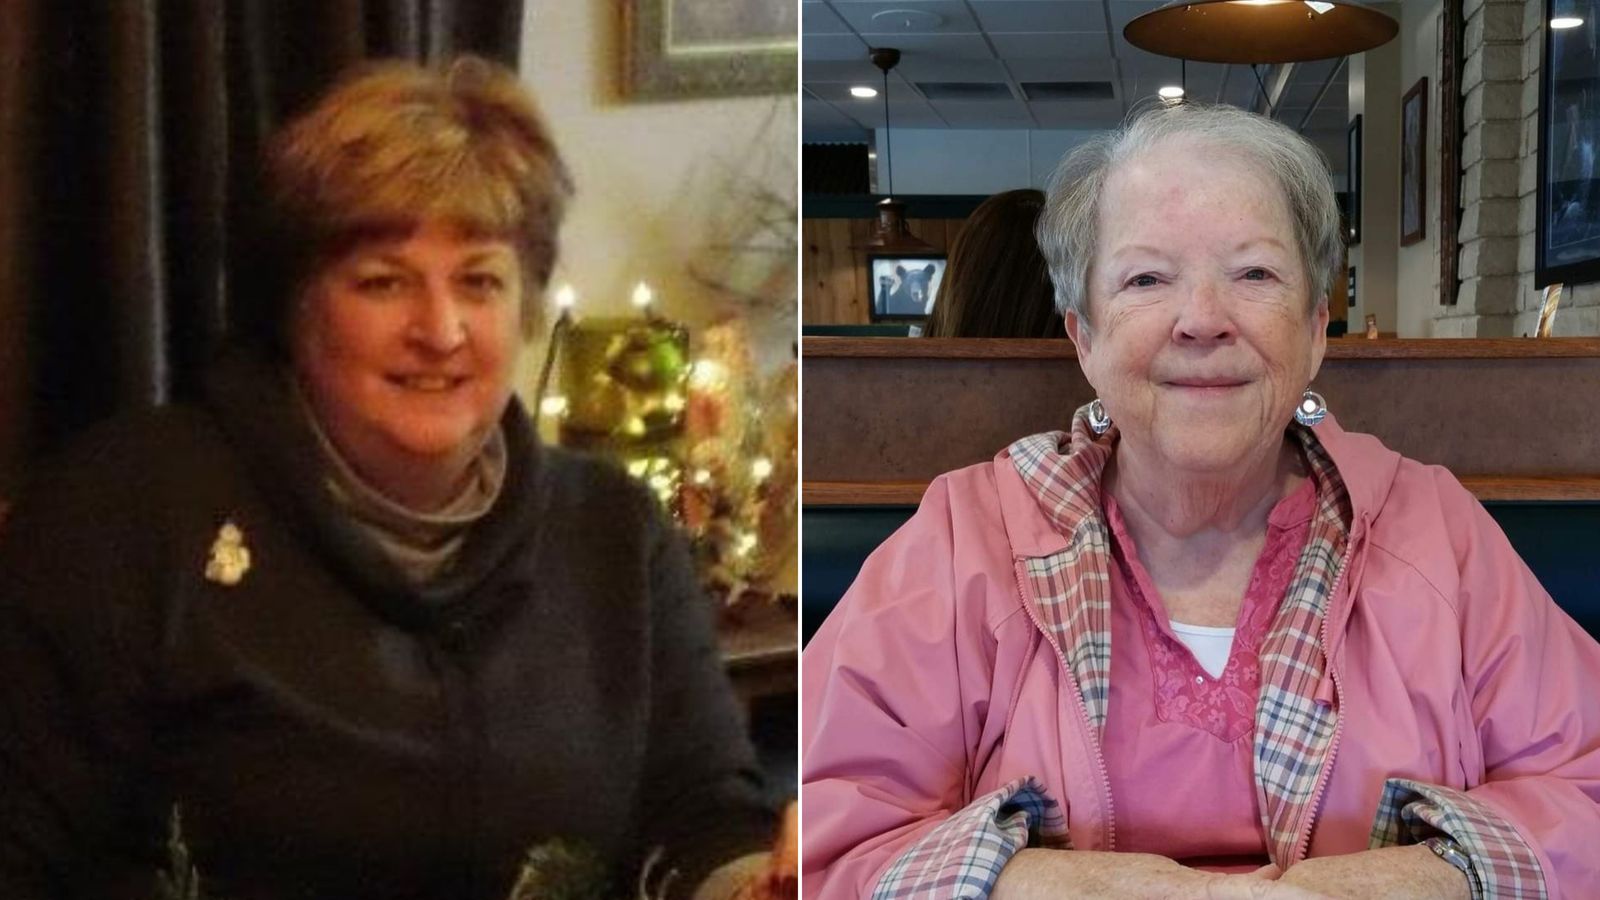 Here's a recent photo of Cathy (left) and Debbie (right). The two friends hope to reunite soon.